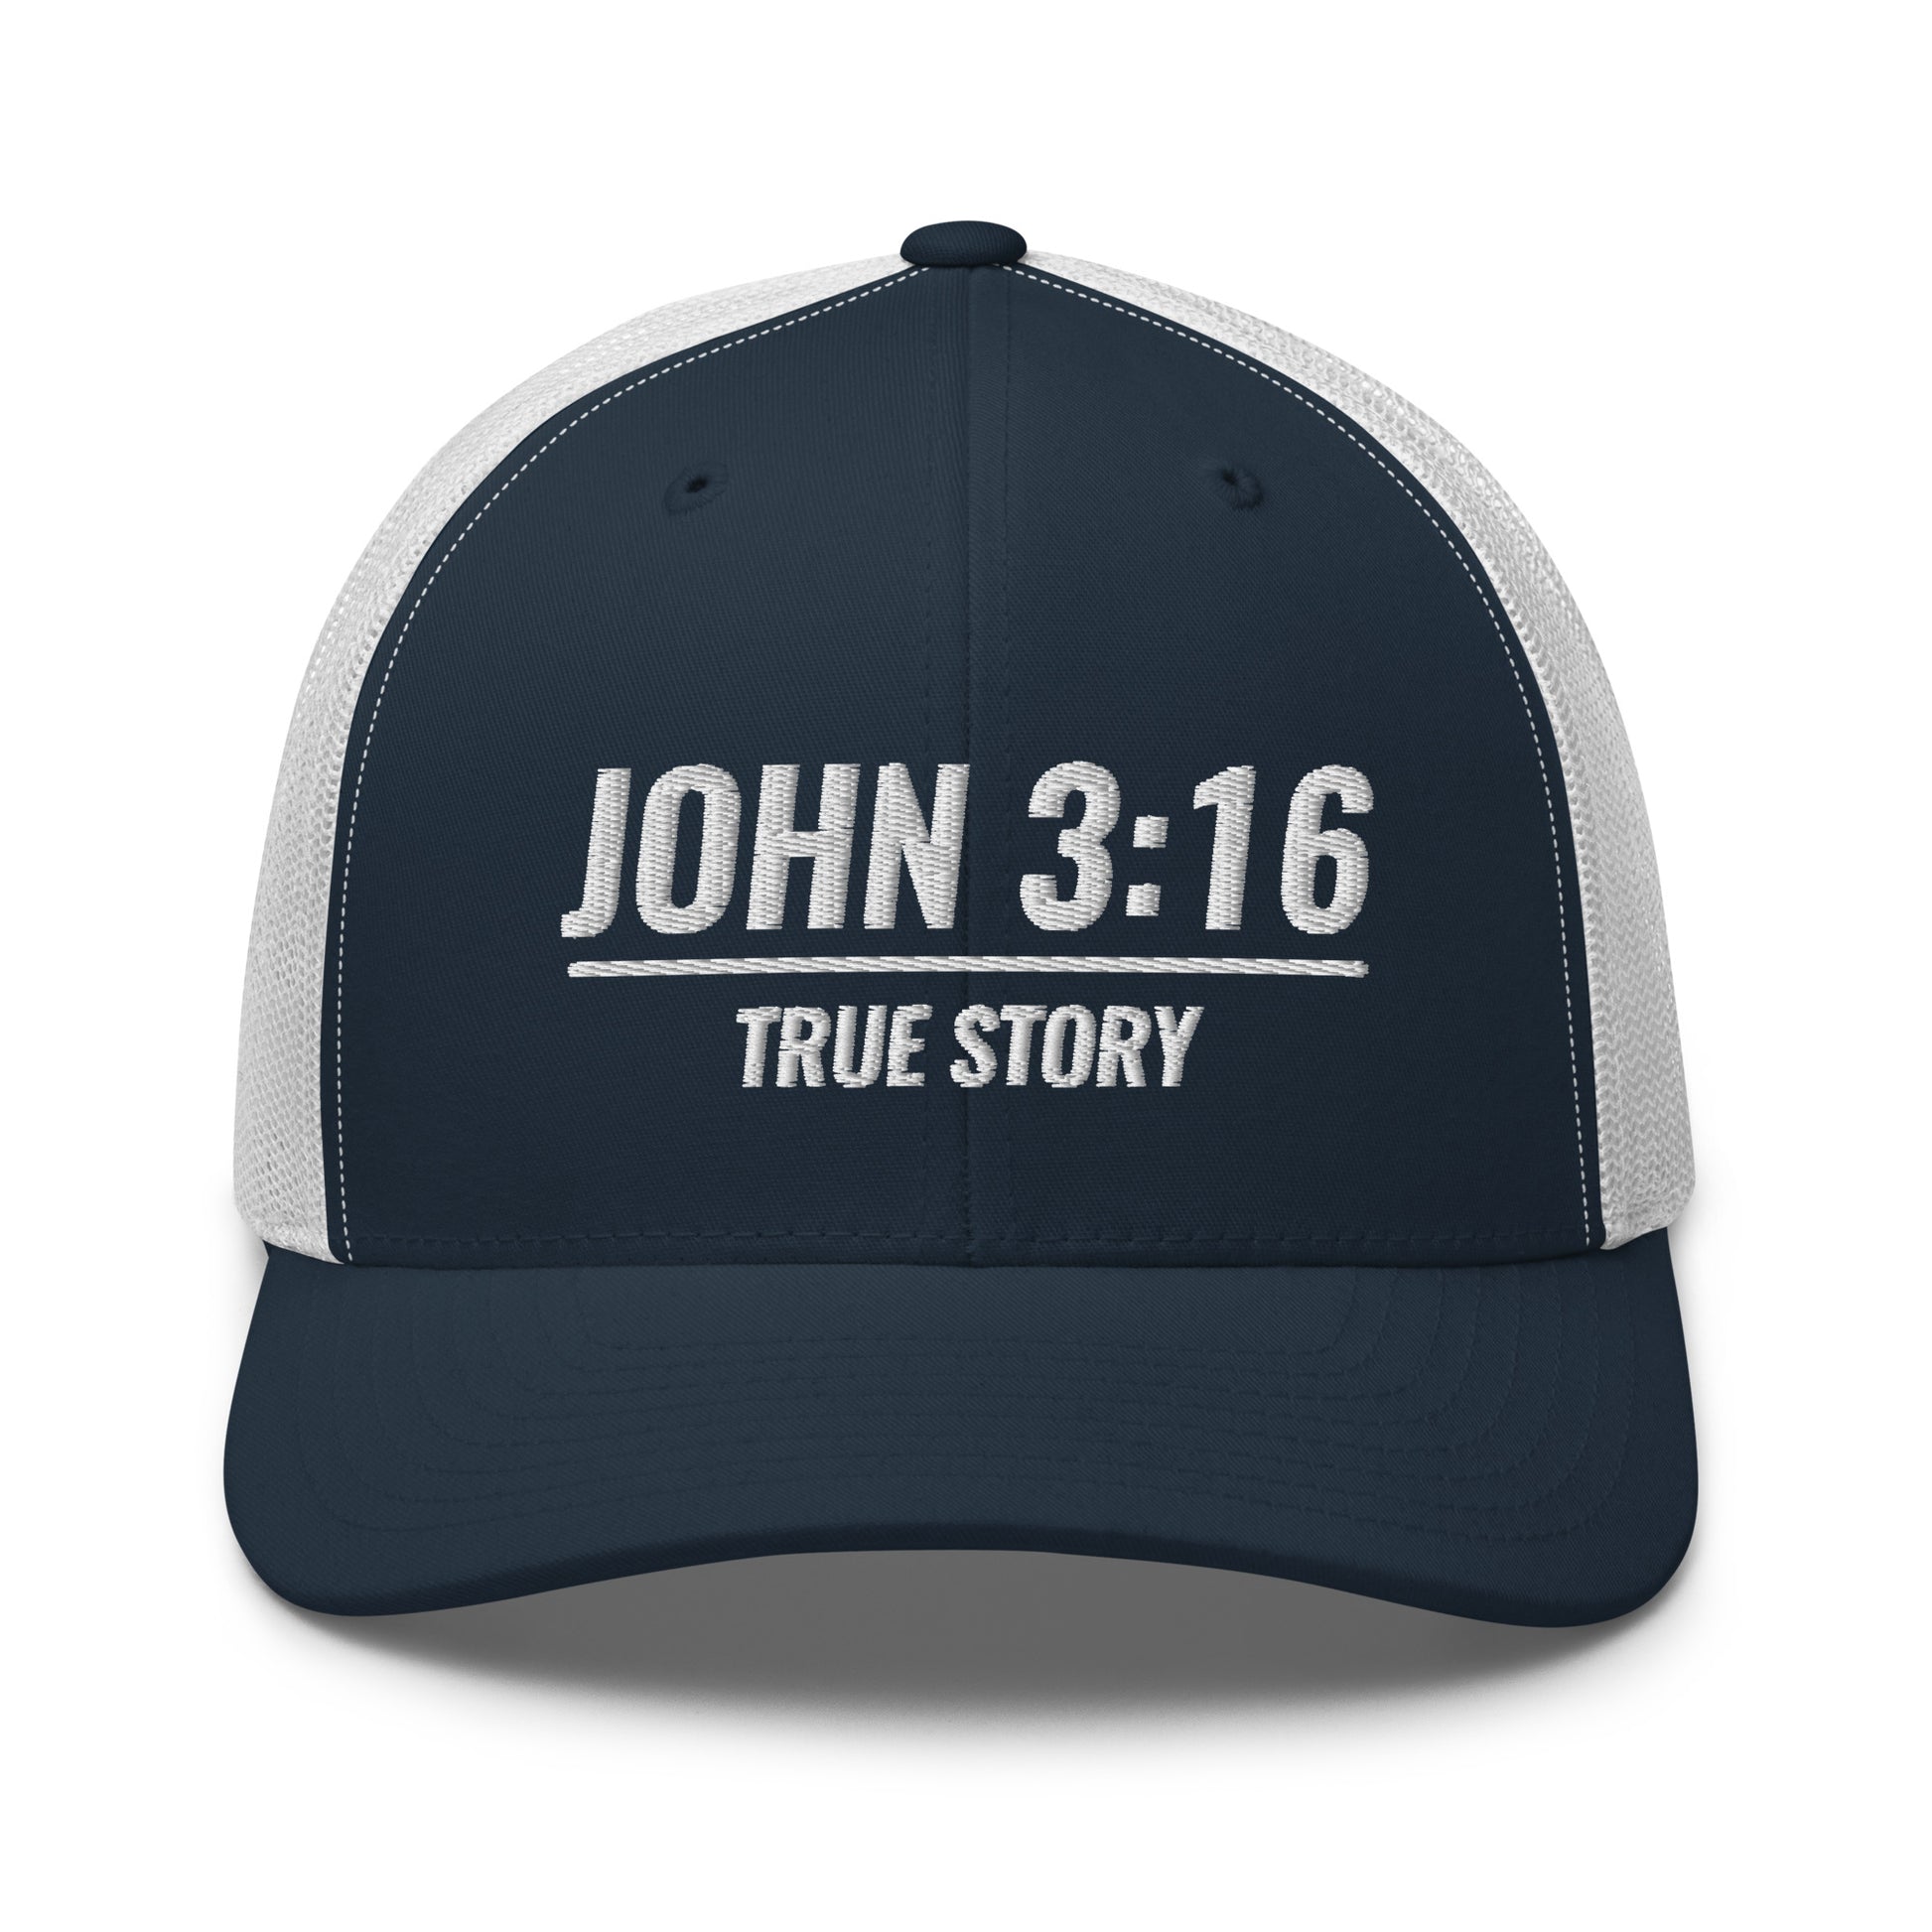 John 3:16 True Story Hat.  A blue and white Yupoong 6606 hat with John 3:16 True Story embroidered on front of hat.